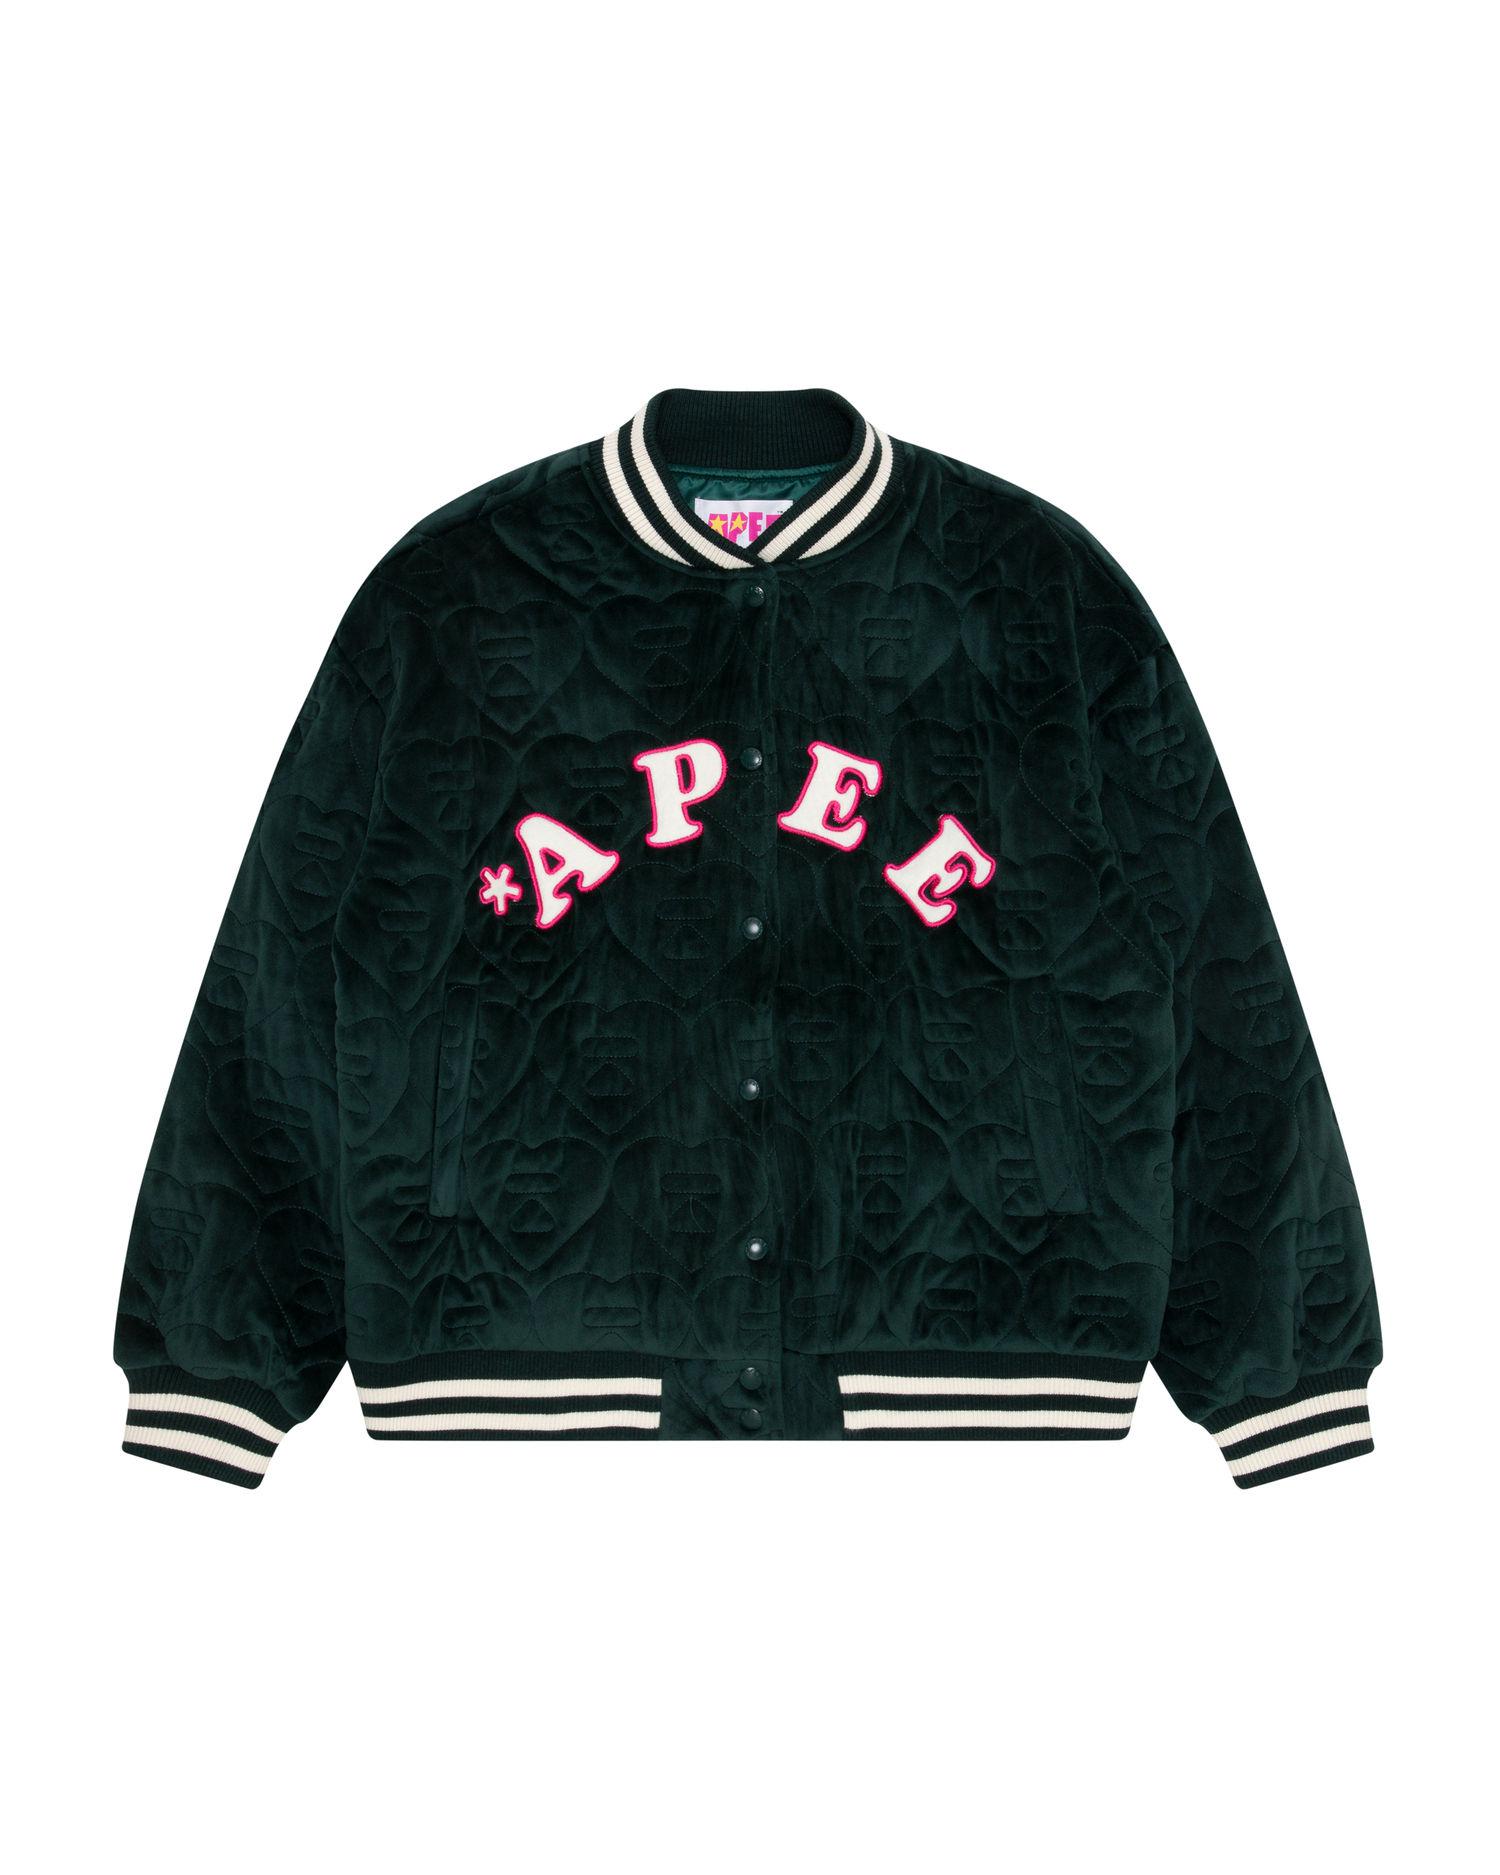 Quilted baseball jacket by APEE